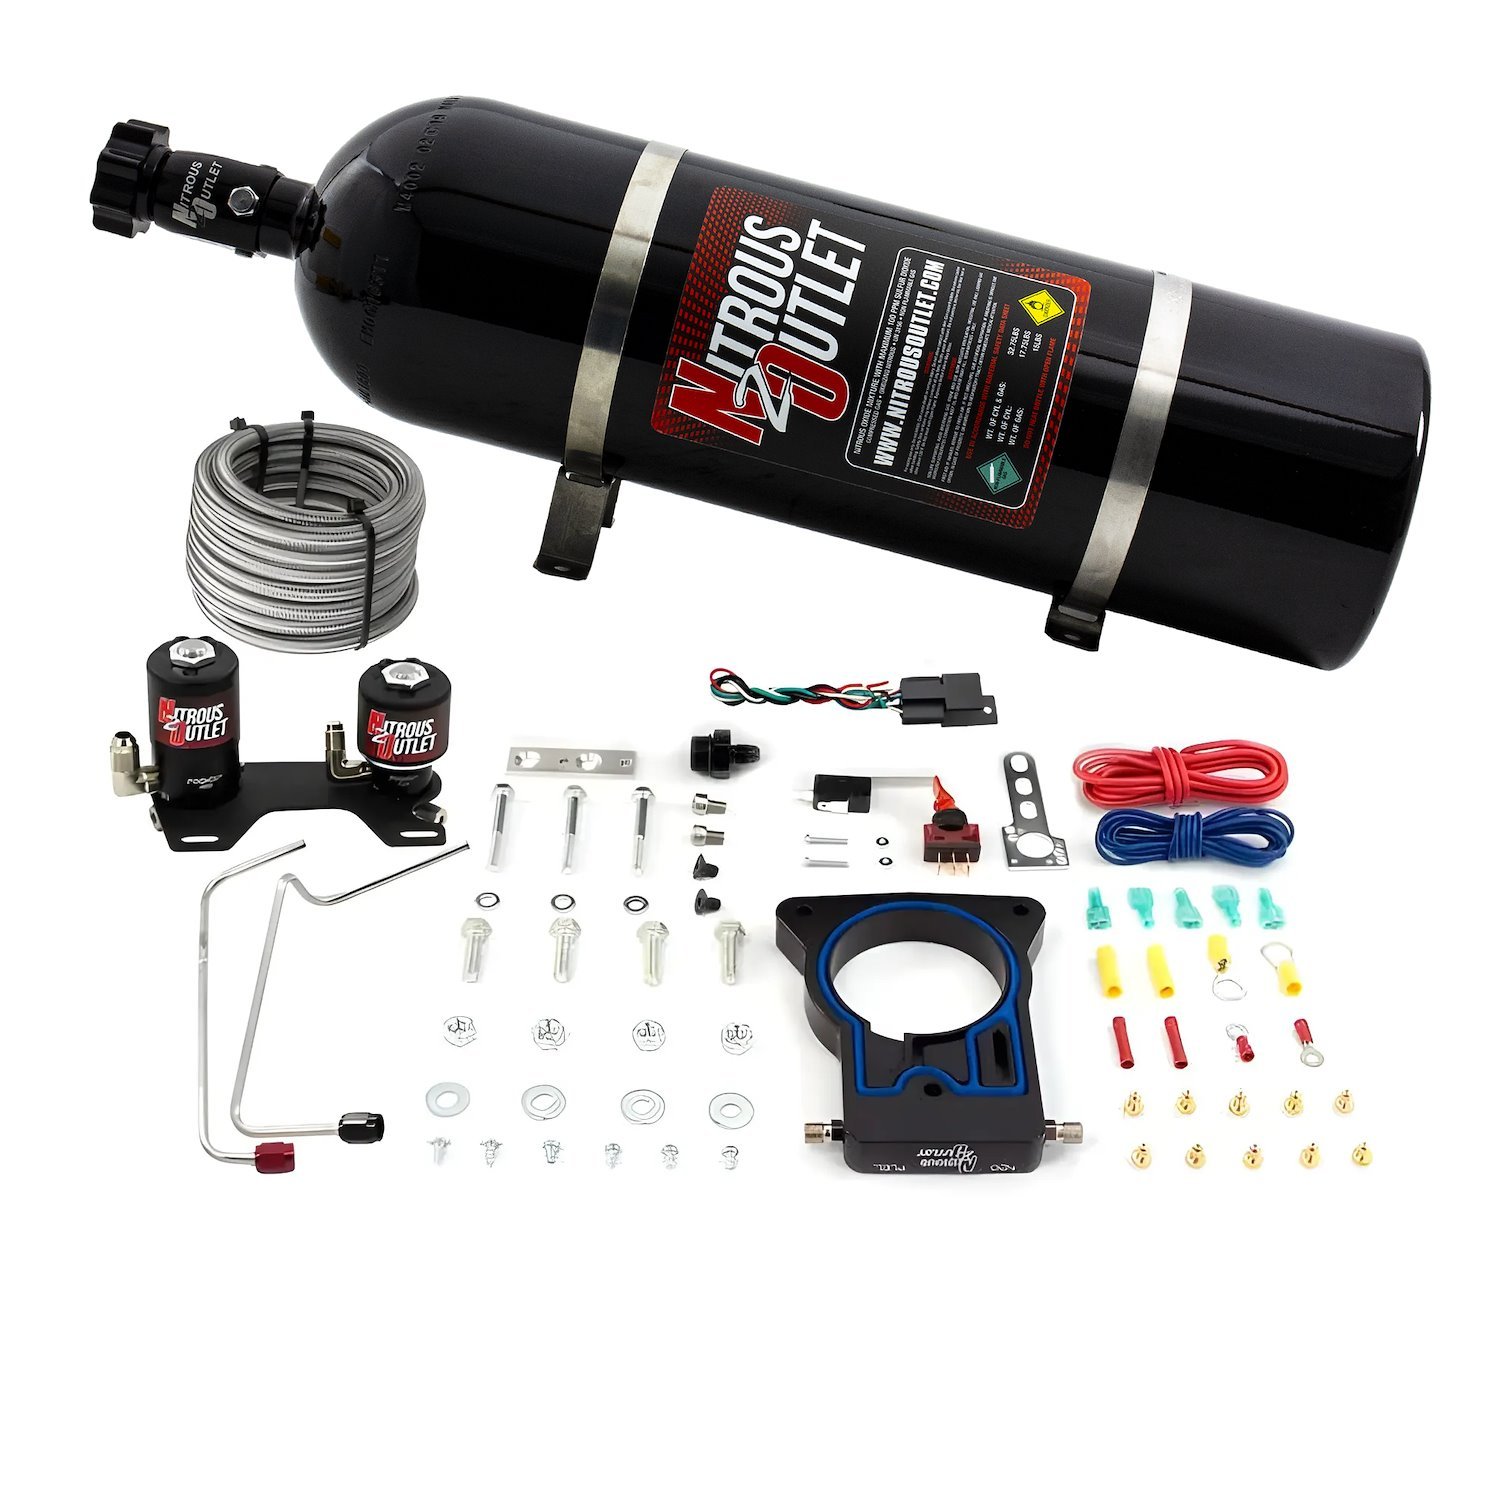 00-10127-15 GM 78 mm 1999-2007 Classic Truck Hard-Line Plate System, Gas/E85, 5-55psi, 50-200HP, 15lb Bottle